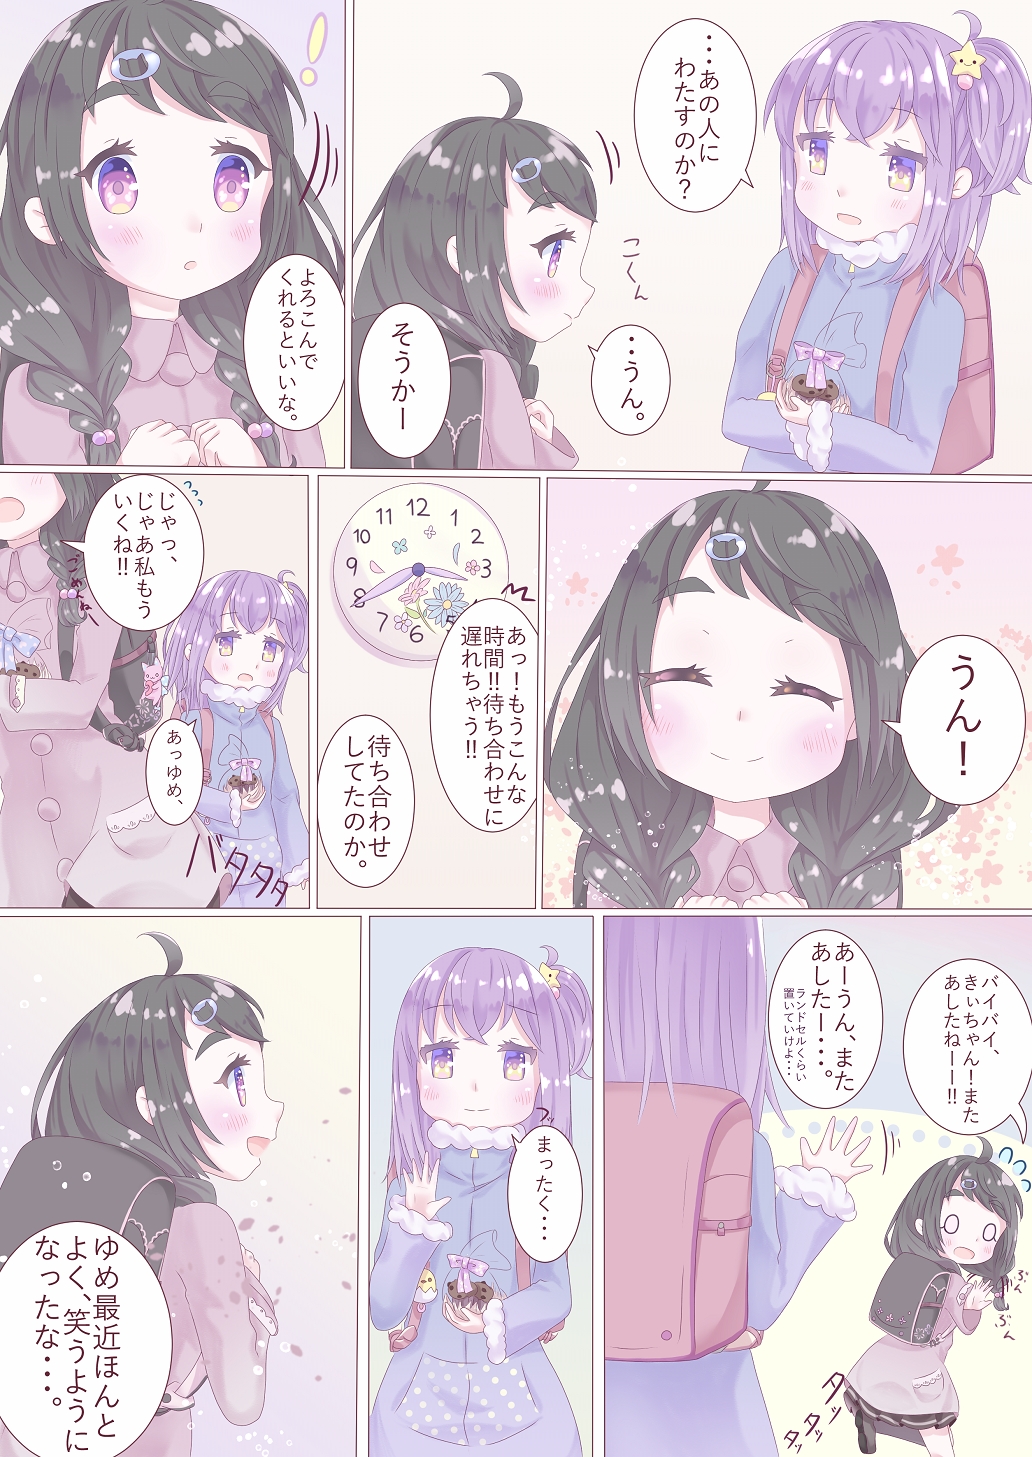 2girls age_difference ahoge backpack bag bangs black_hair blush blush_stickers bow breasts clenched_hands clock closed_mouth coat comic ears_visible_through_hair eyebrows_visible_through_hair gift_bag hair_ornament hairpin hamkuti highres knapsack long_hair long_sleeves looking_at_another looking_at_viewer looking_away multicolored multicolored_eyes multiple_girls open_mouth original purple_bow purple_hair randoseru speech_bubble standing translation_request yuri